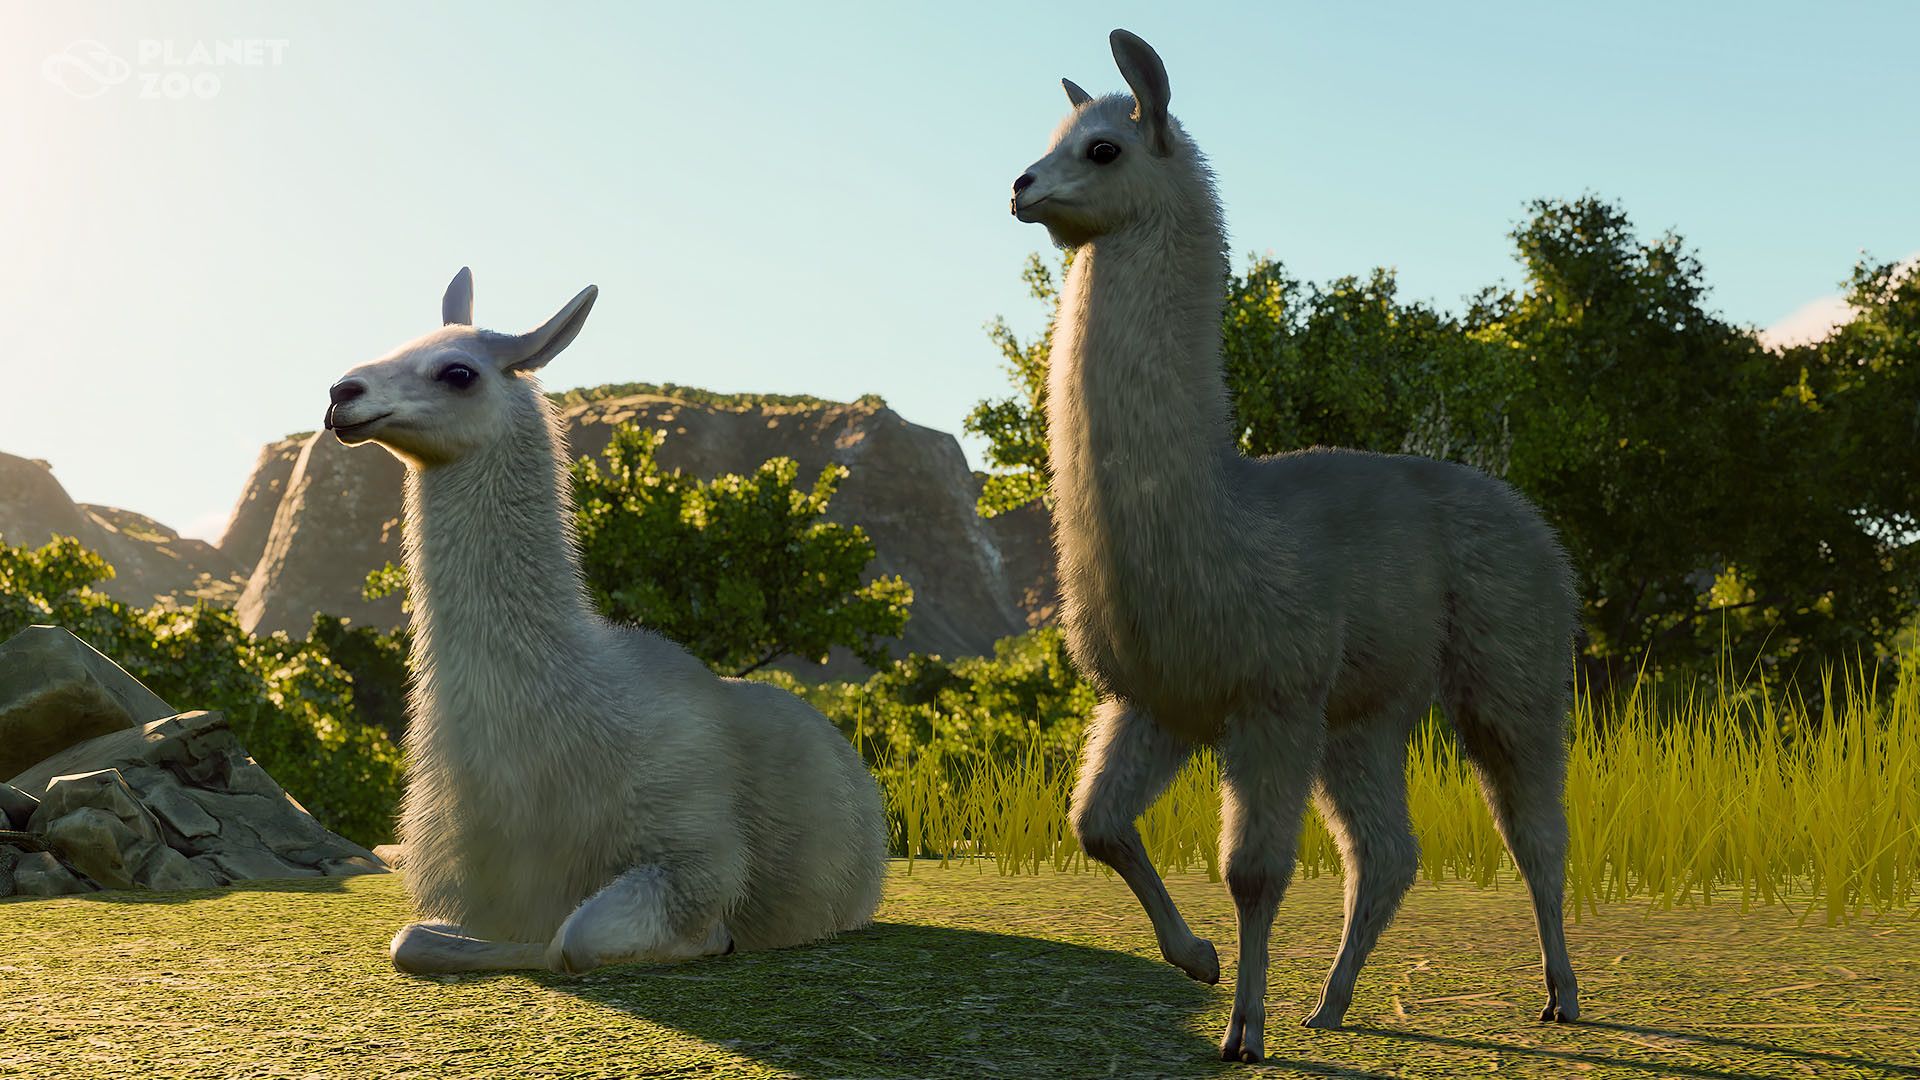 Planet Zoo: South America Packâ€¯